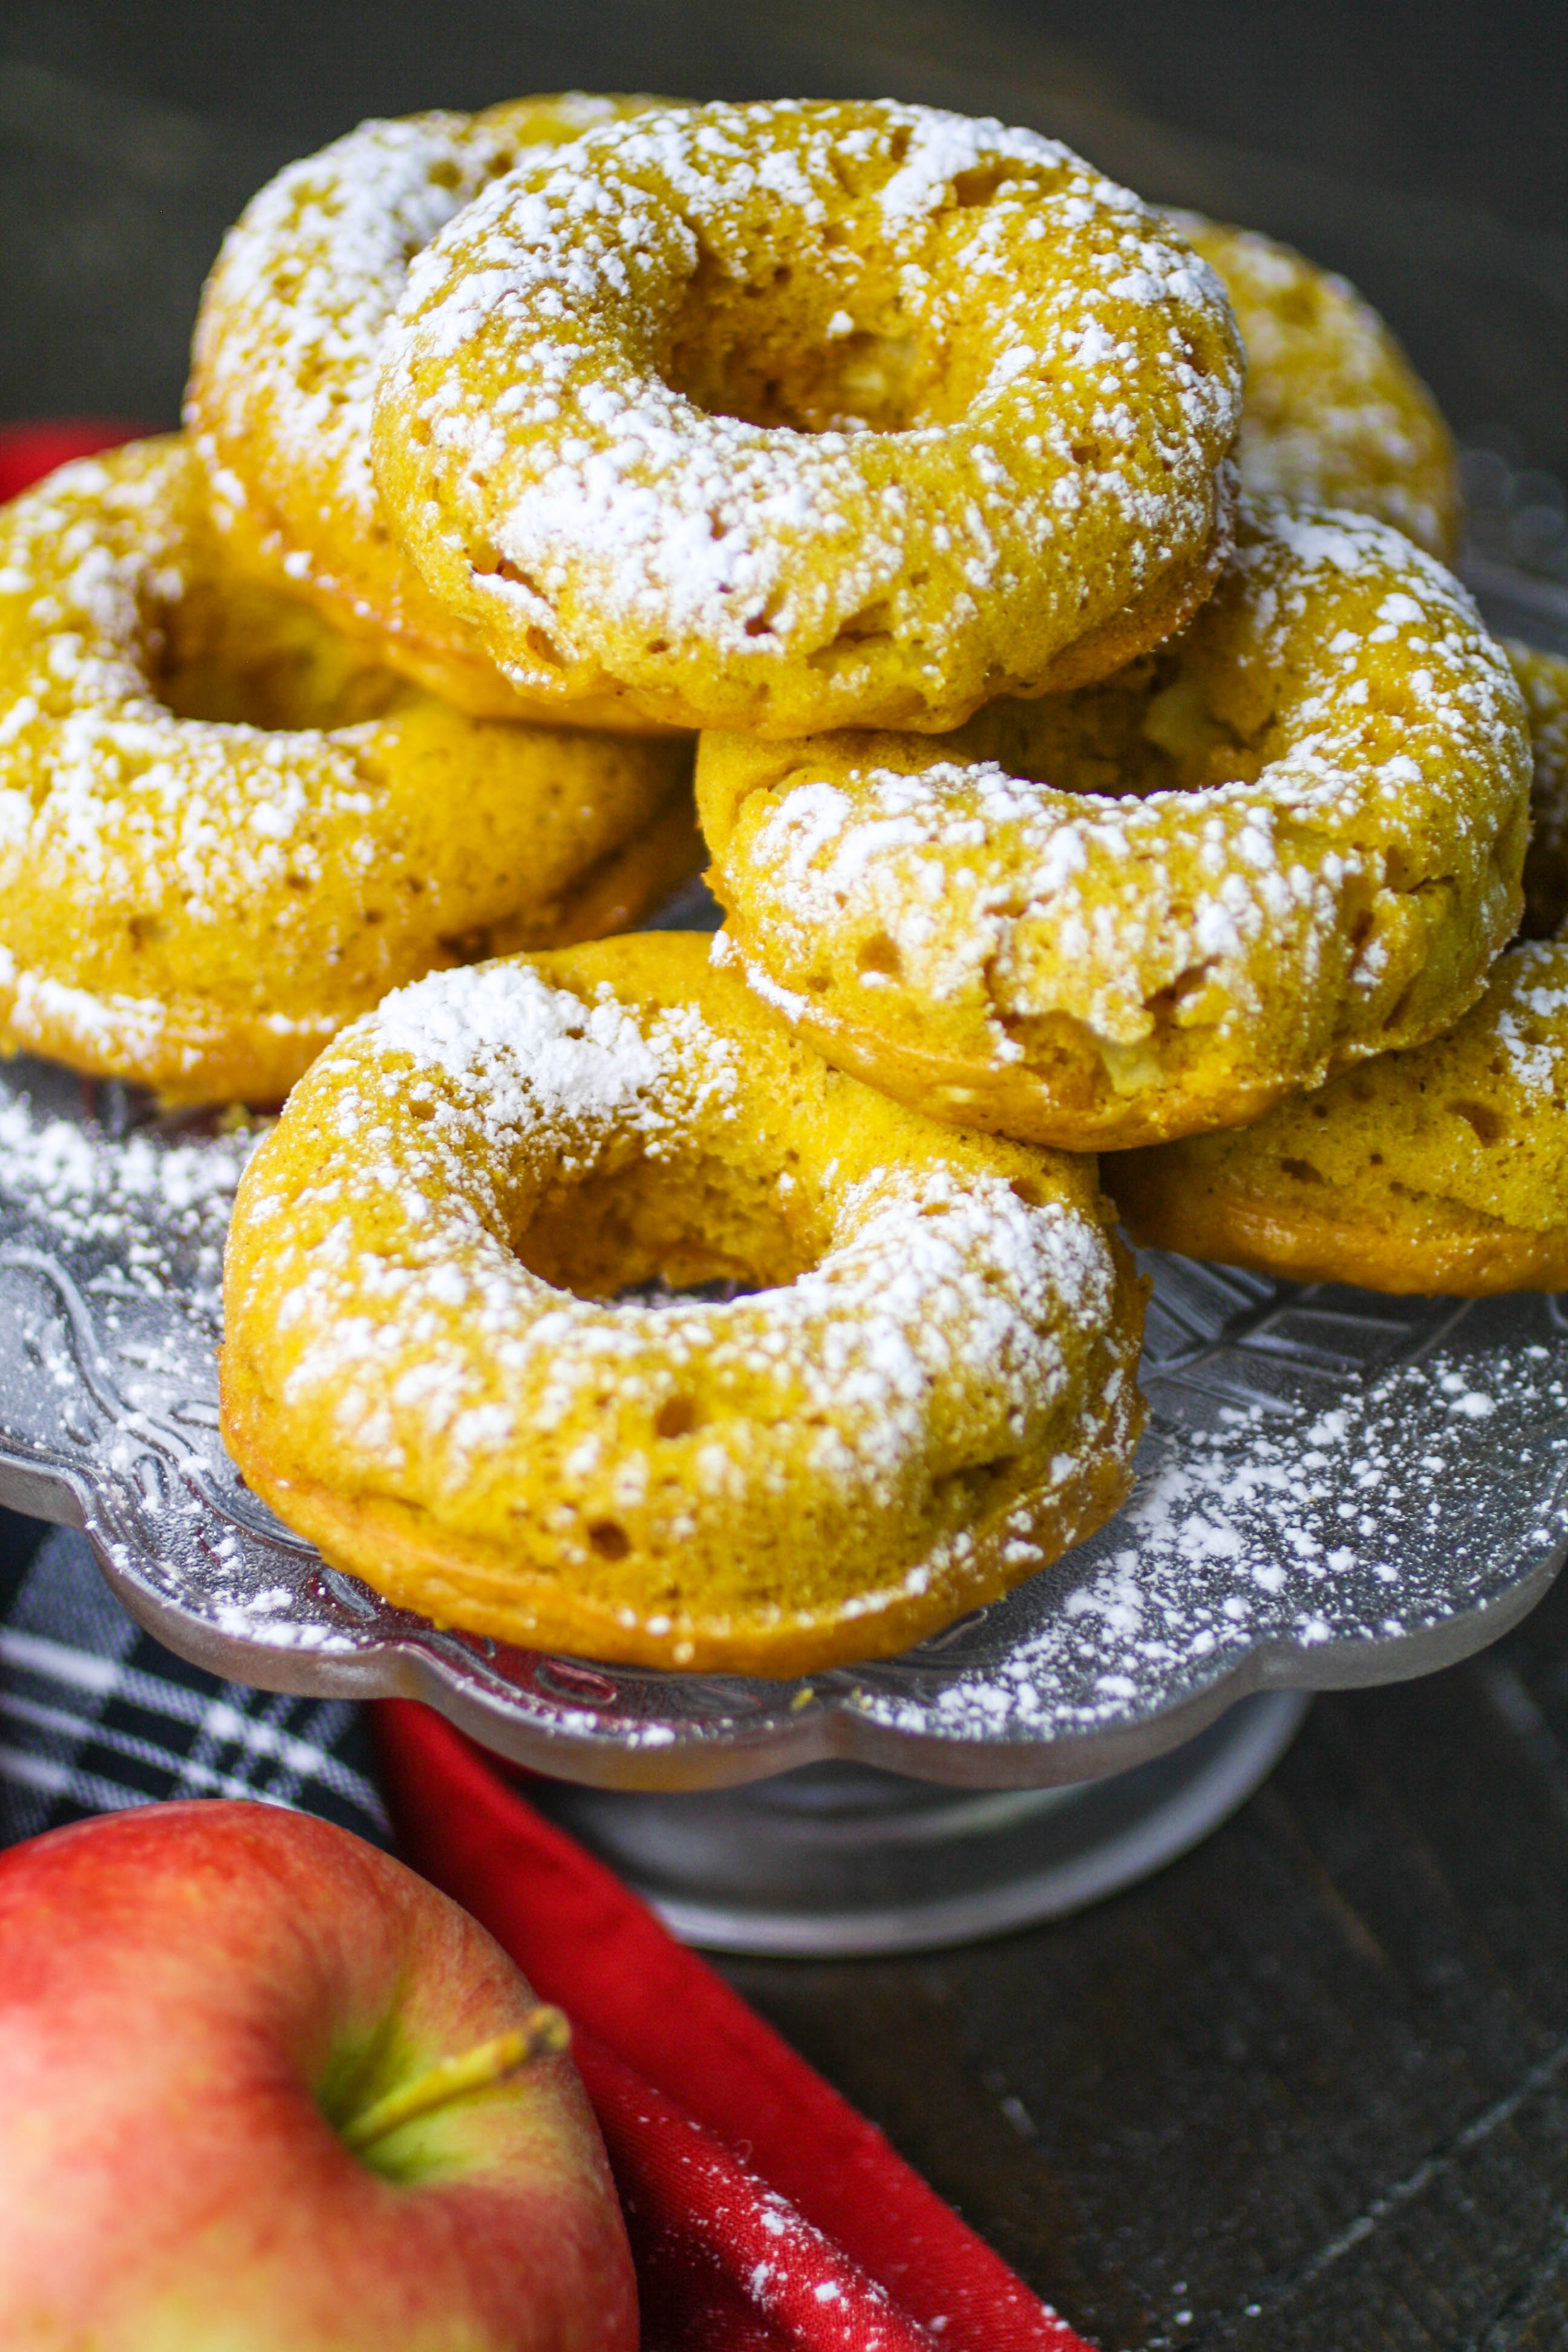 Baked Spiced Apple & Pumpkin Donuts are a sweet treat you'll love. Baked Spiced Apple & Pumpkin Donuts are easy to make for a fall treat.